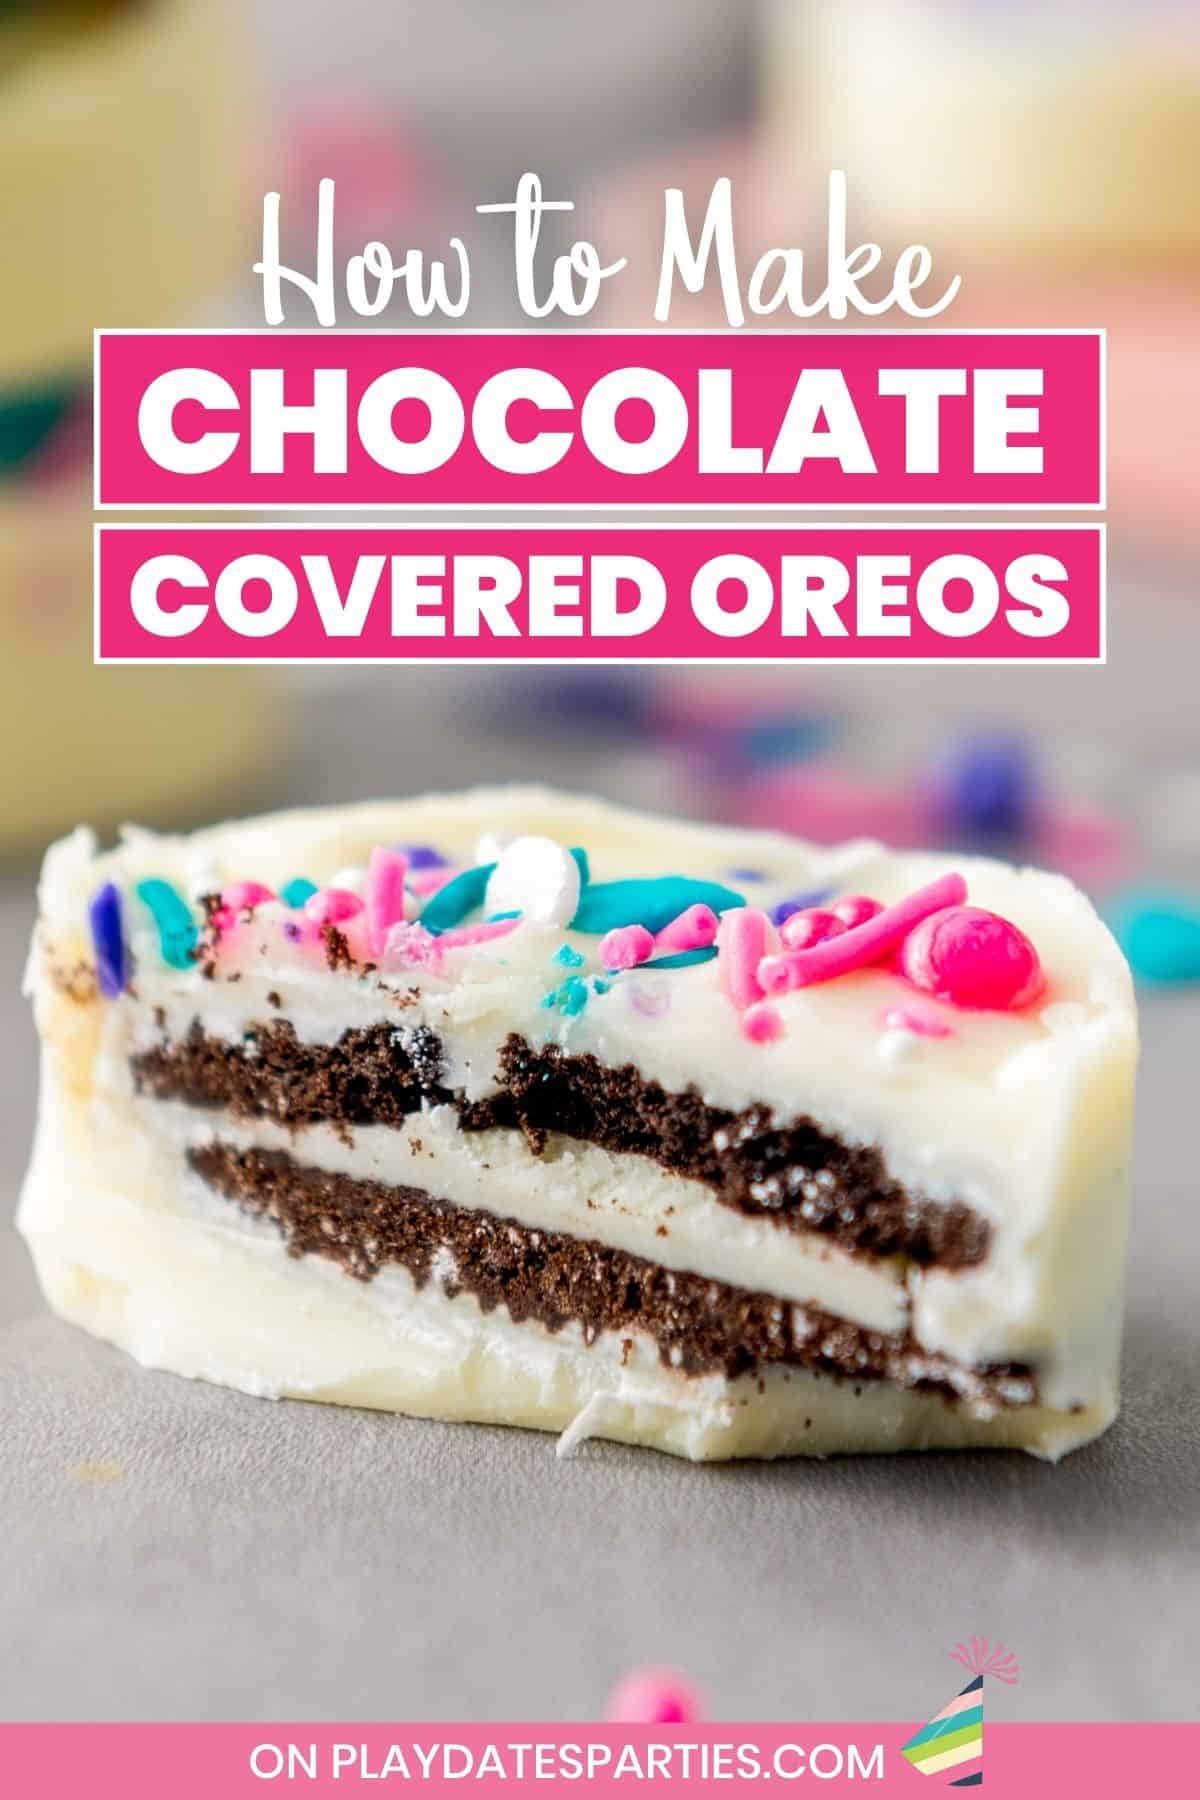 How to Make Chocolate Covered Oreos Pin Image.